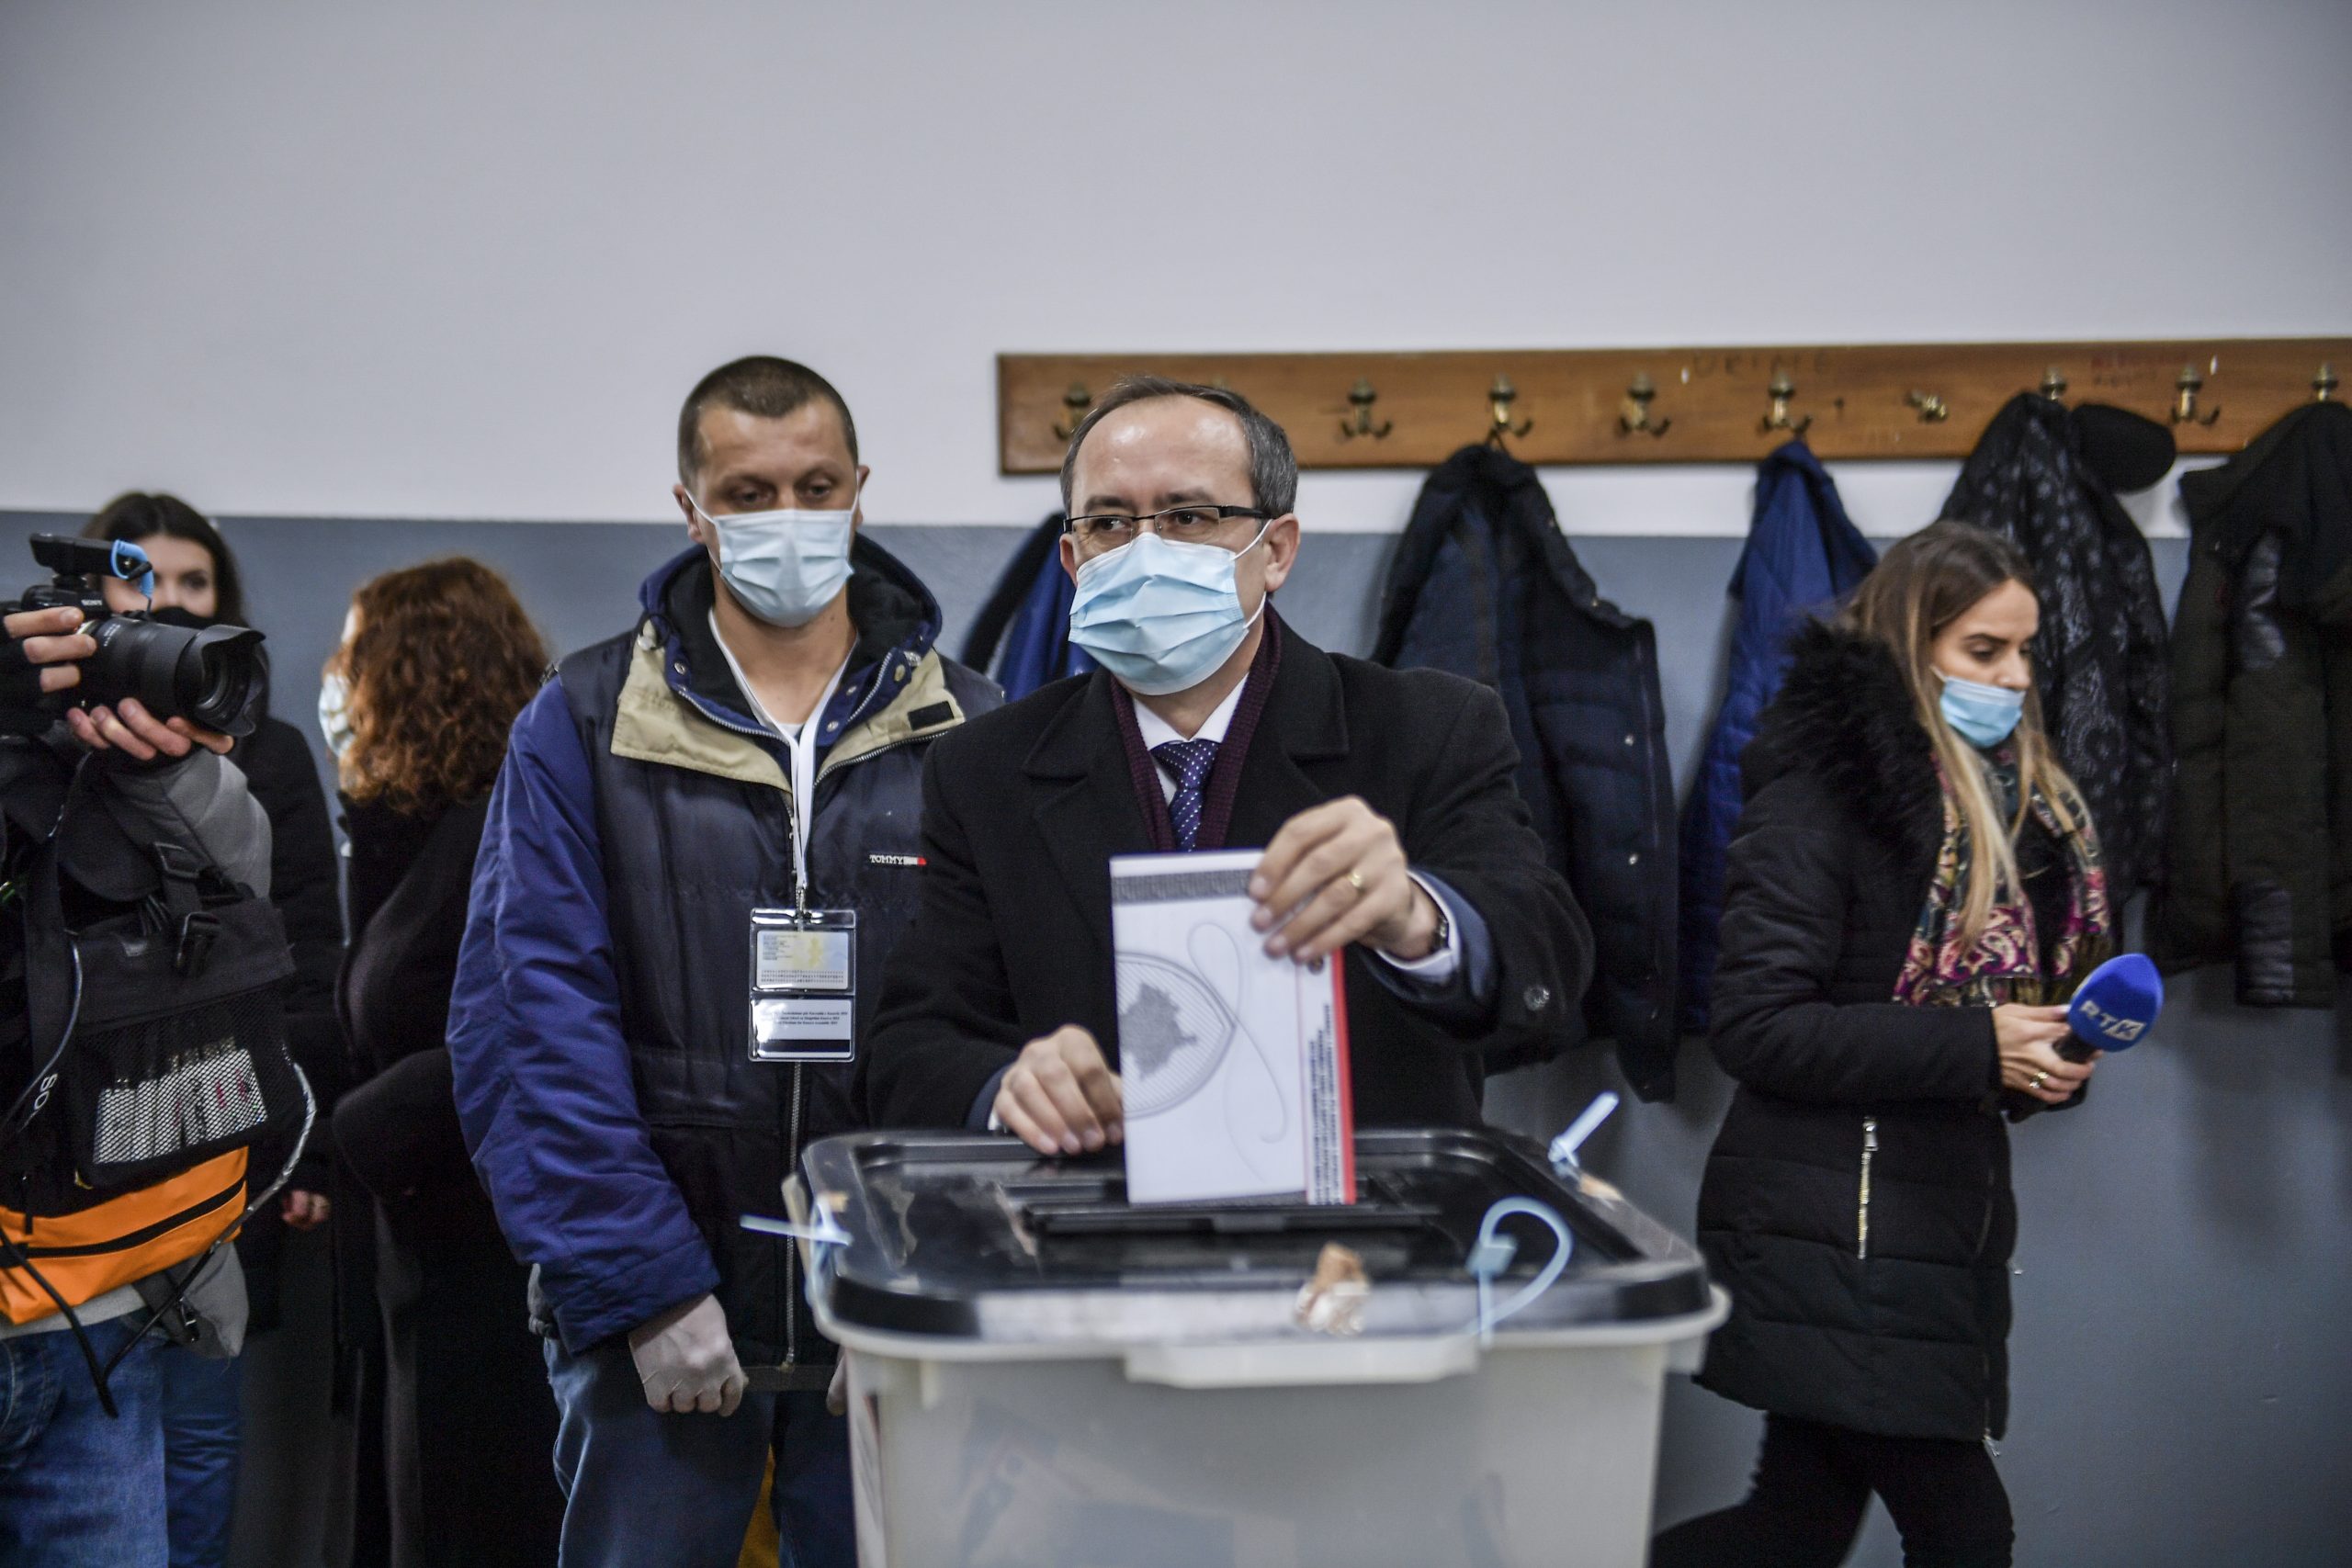 epa09011507 A handout photo made available by the Government of Kosovo shows Acting Prime Minister of Kosovo Avdullah Hoti (C) casting his vote at a voting center in Pristina, Kosovo, 14 February 2021. Kosovo's early parliamentary elections will be held on 14 February 2021. Around 1.8 million voters have the right to cast ballots during snap elections to elect a new 120 seat parliament.  EPA/ERMAL META/KOSOVO GOVERNMENT HANDOUT  HANDOUT EDITORIAL USE ONLY/NO SALES